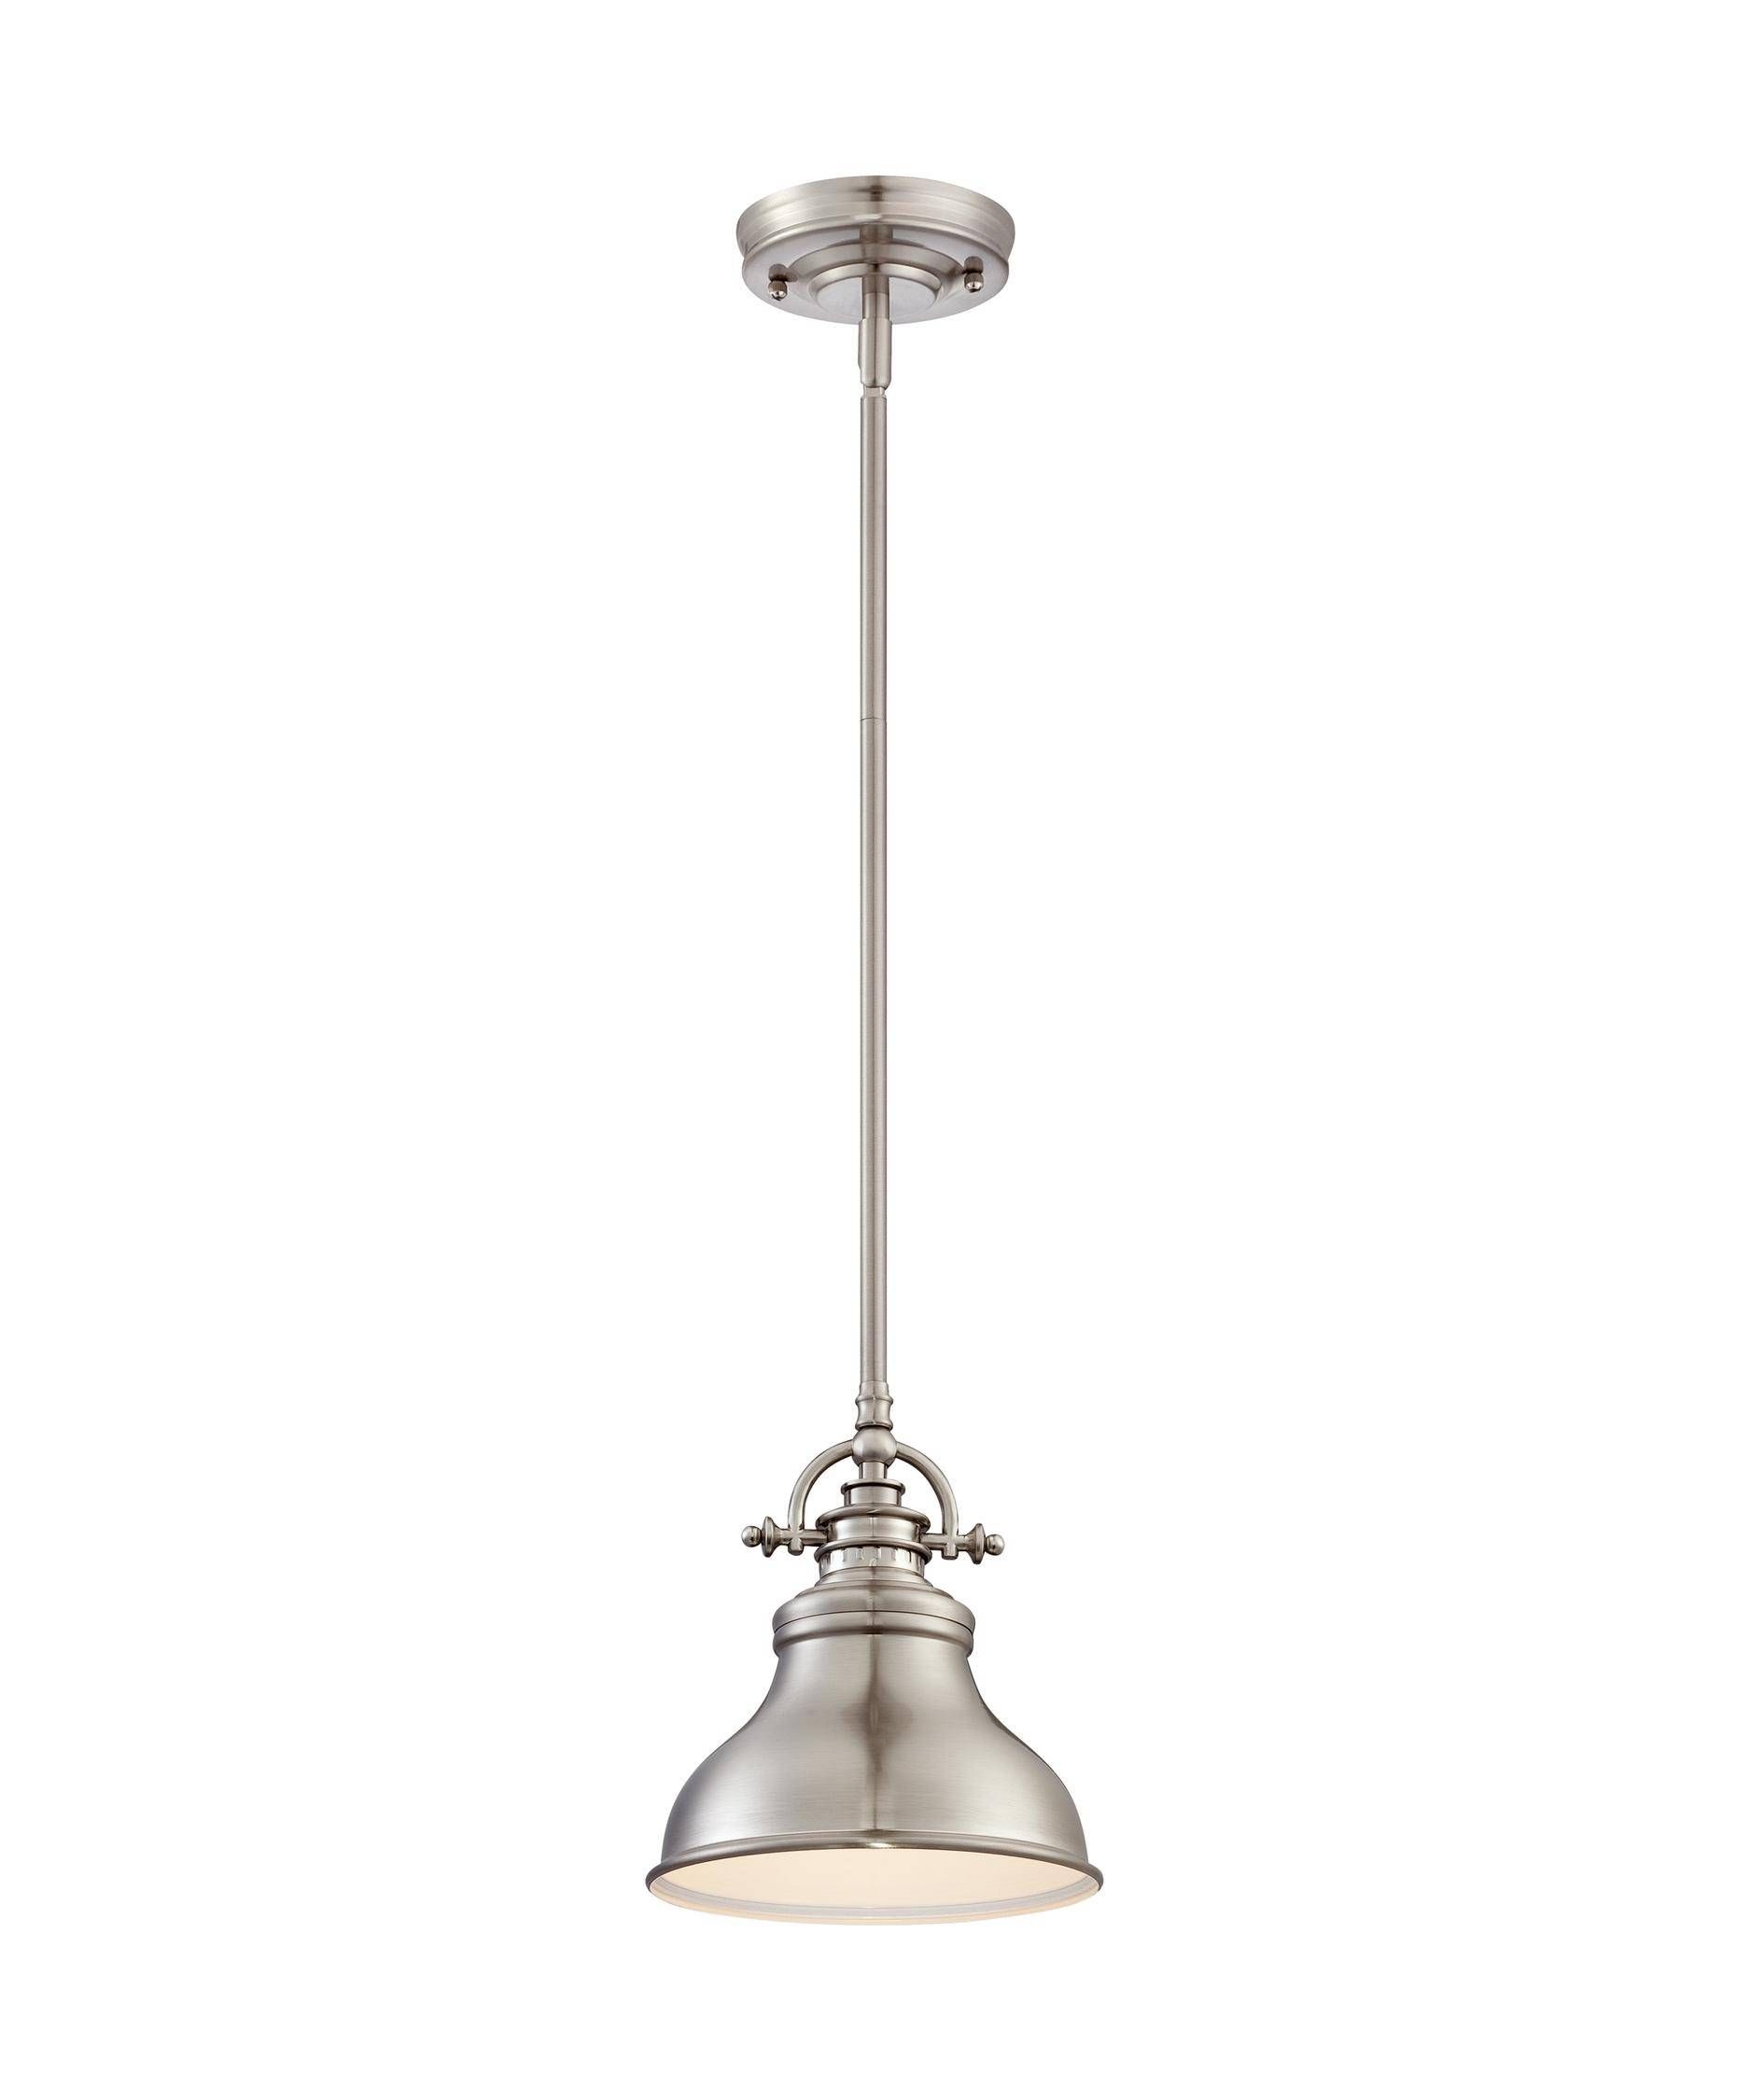 Quoizel Er1508 Emery 8 Inch Wide 1 Light Mini Pendant | Capitol With Regard To Quoizel Pendant Lights Fixtures (View 8 of 15)